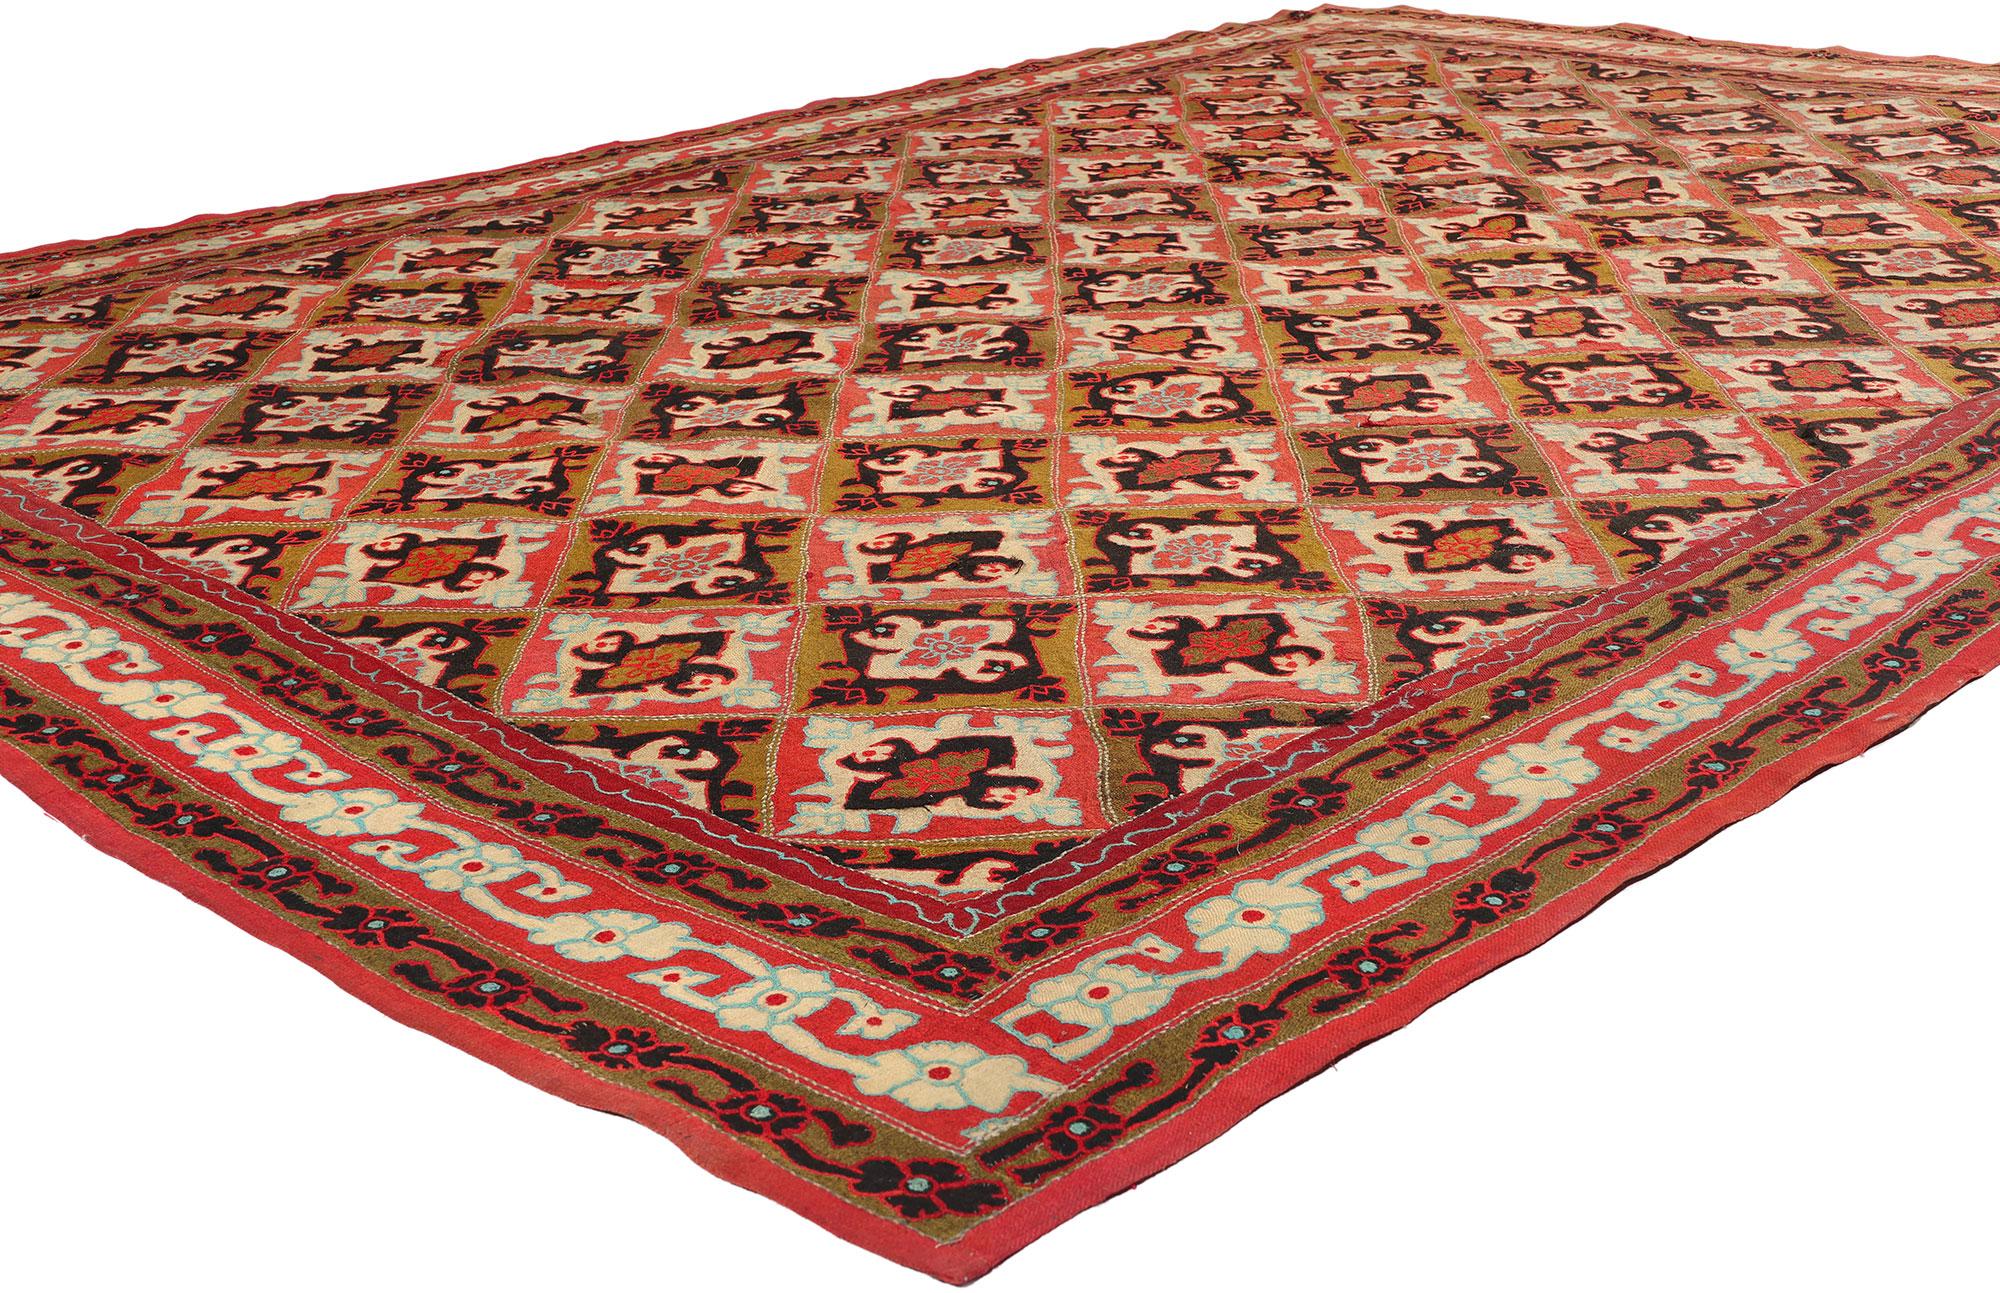 71812 Antique Indian Kashmir Wool Felted Rug, 09'00 x 12'00. ​Indian Kashmir wool felted rugs are handcrafted textiles made in the Kashmir region of India using a traditional felting technique, where wool fibers are matted together through moisture,